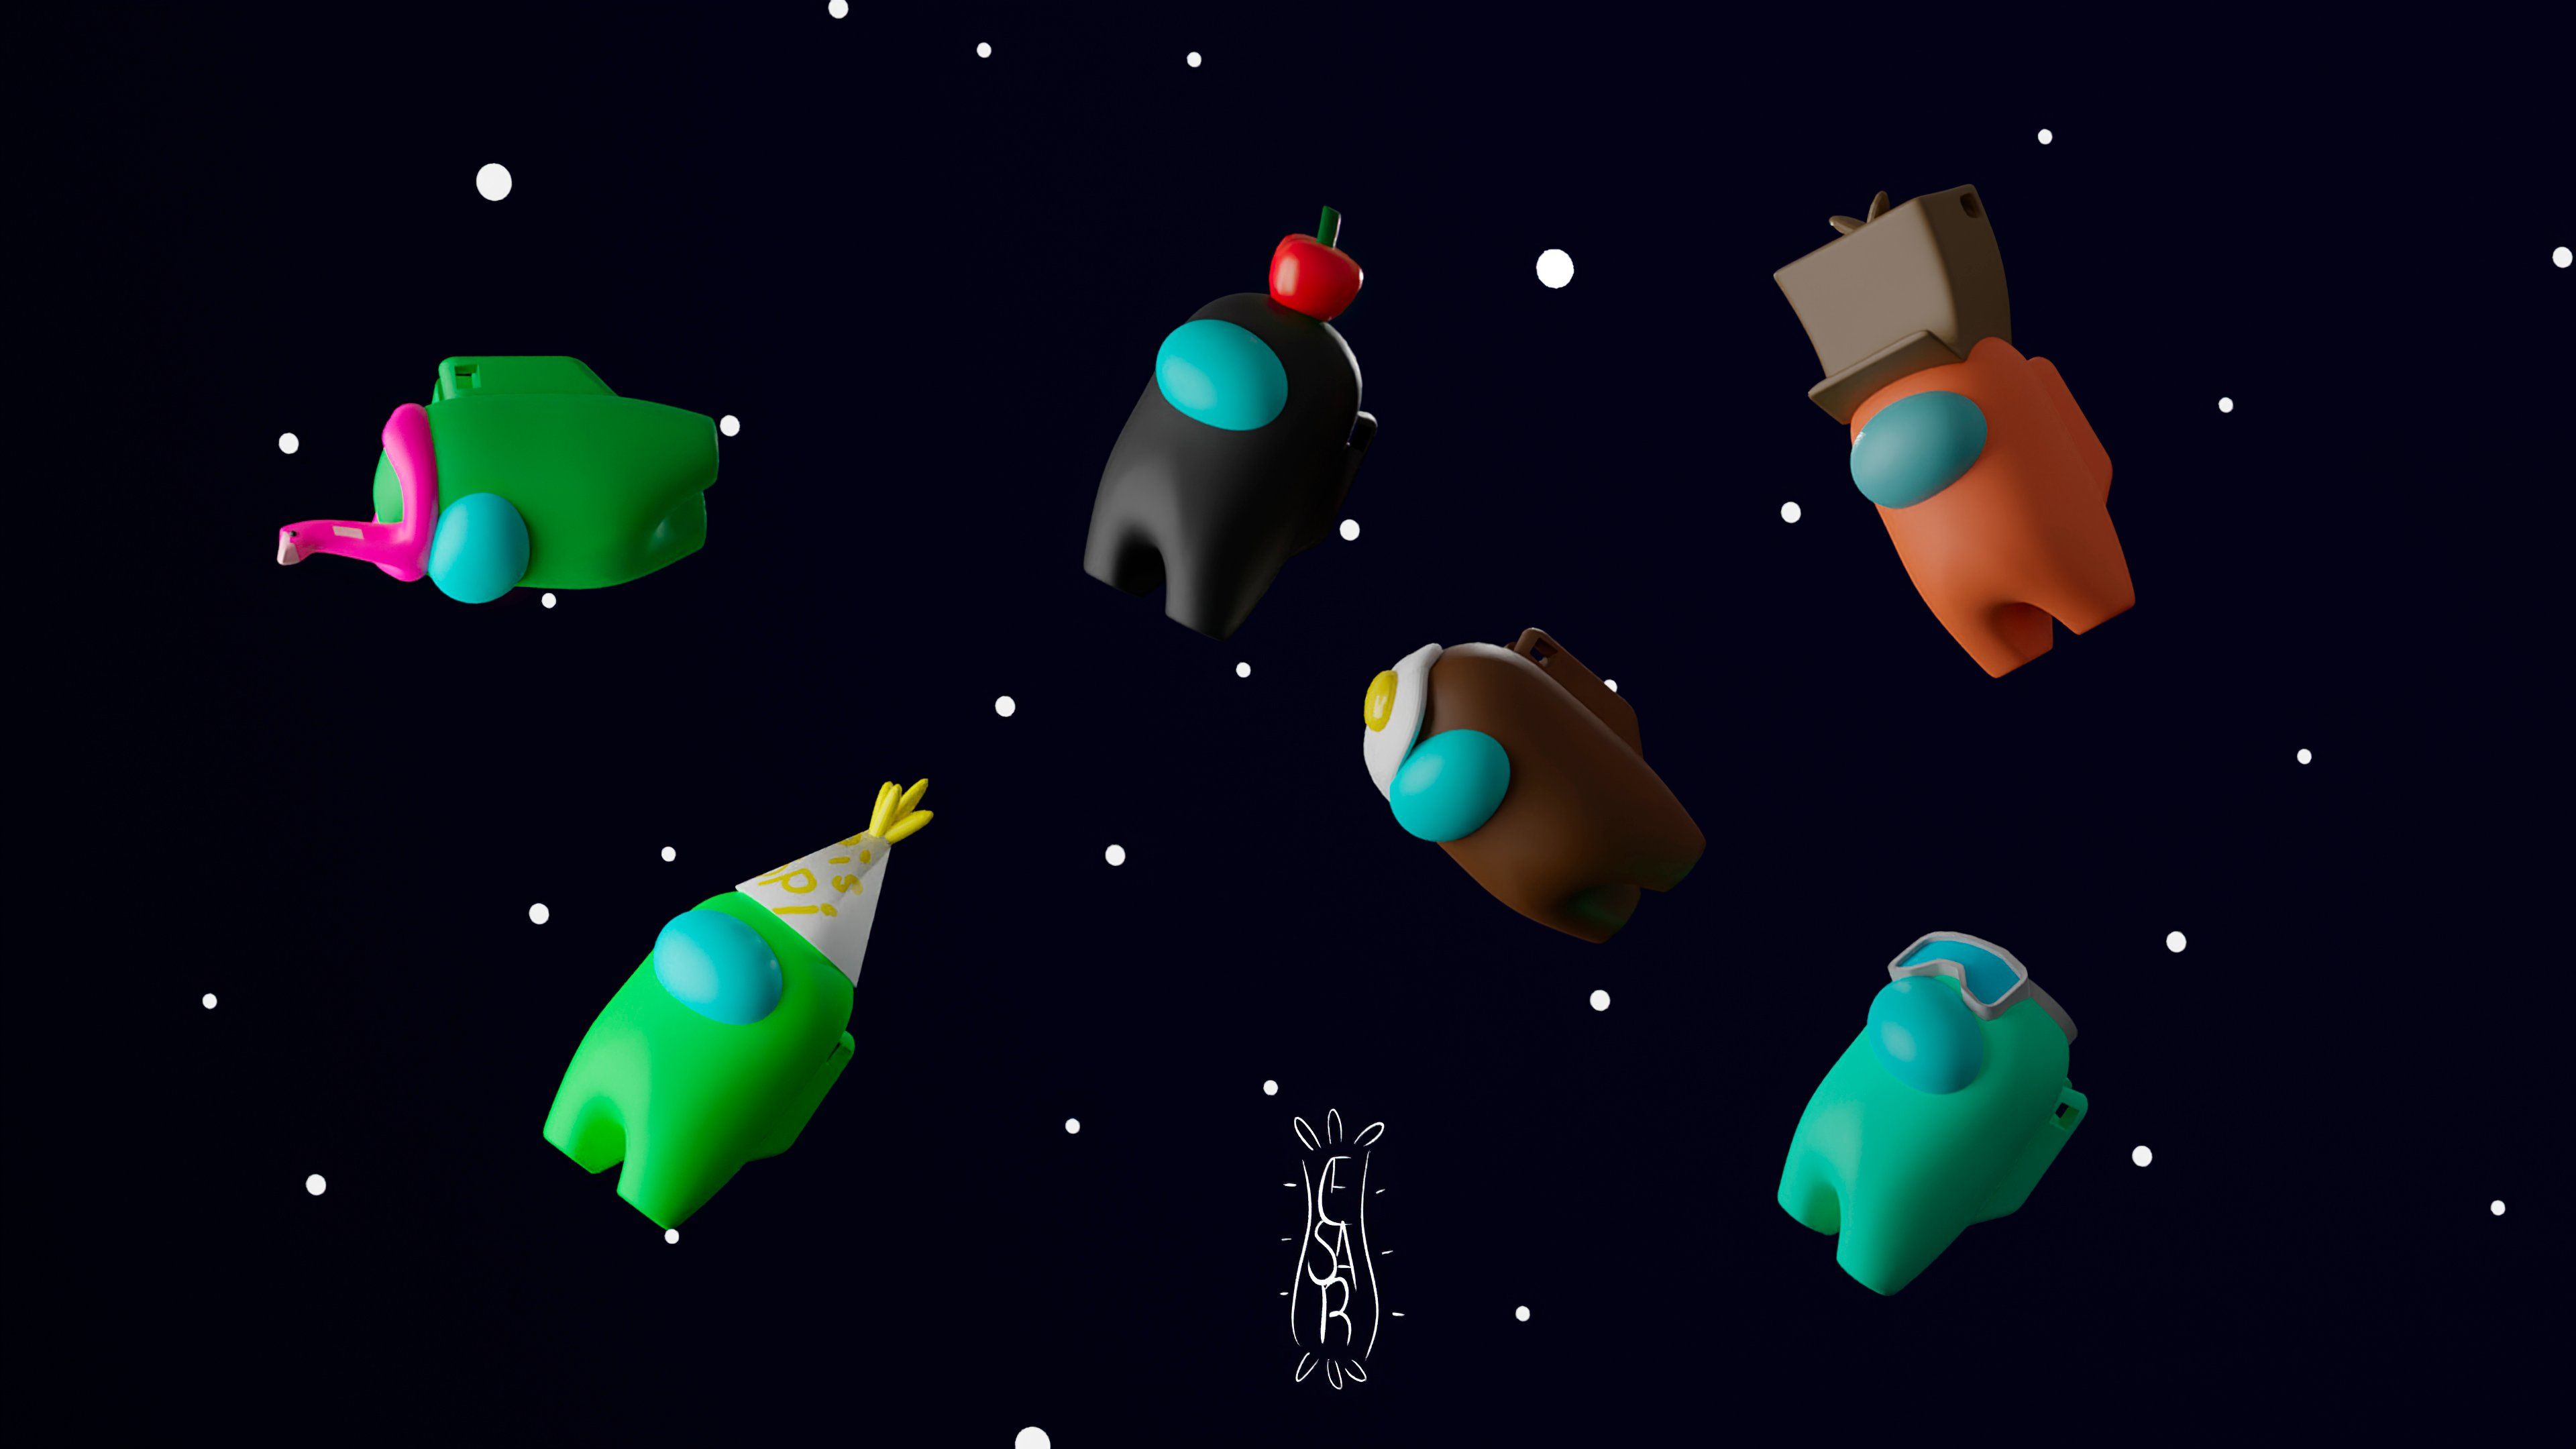 6 characters from the game Among Us floating in space - 3D